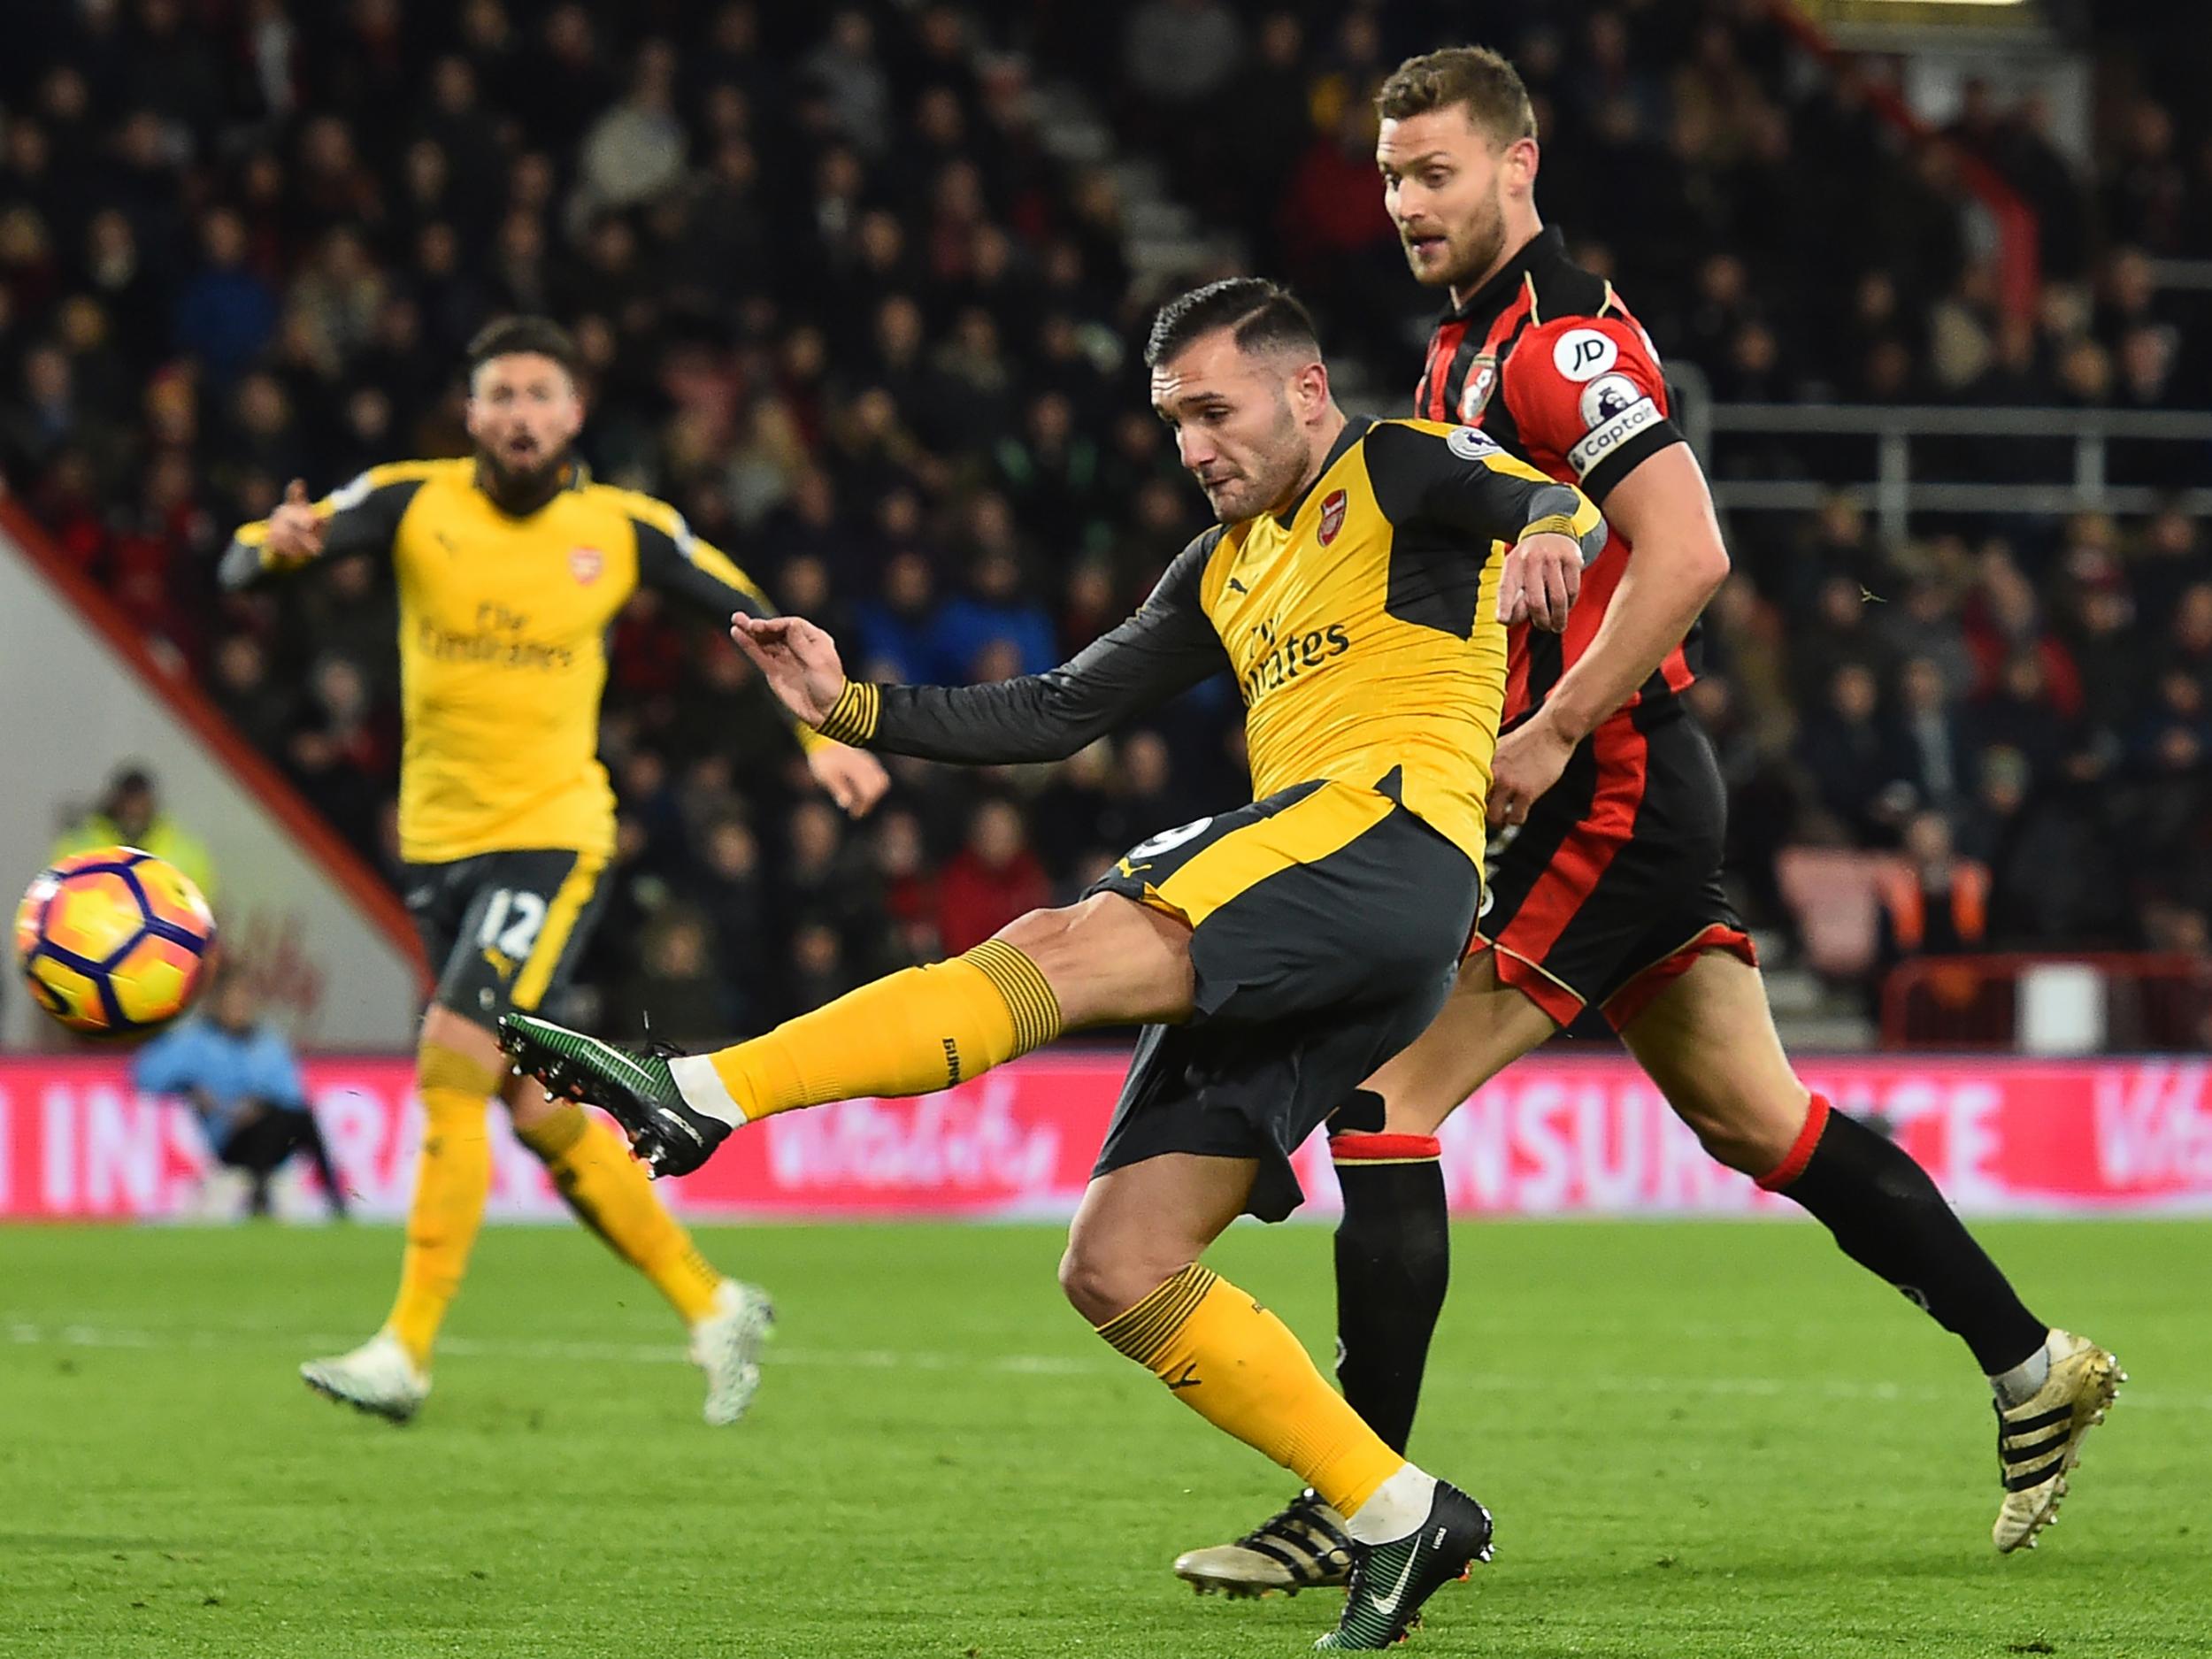 Lucas Perez's exquisite volley brought it back to 3-2